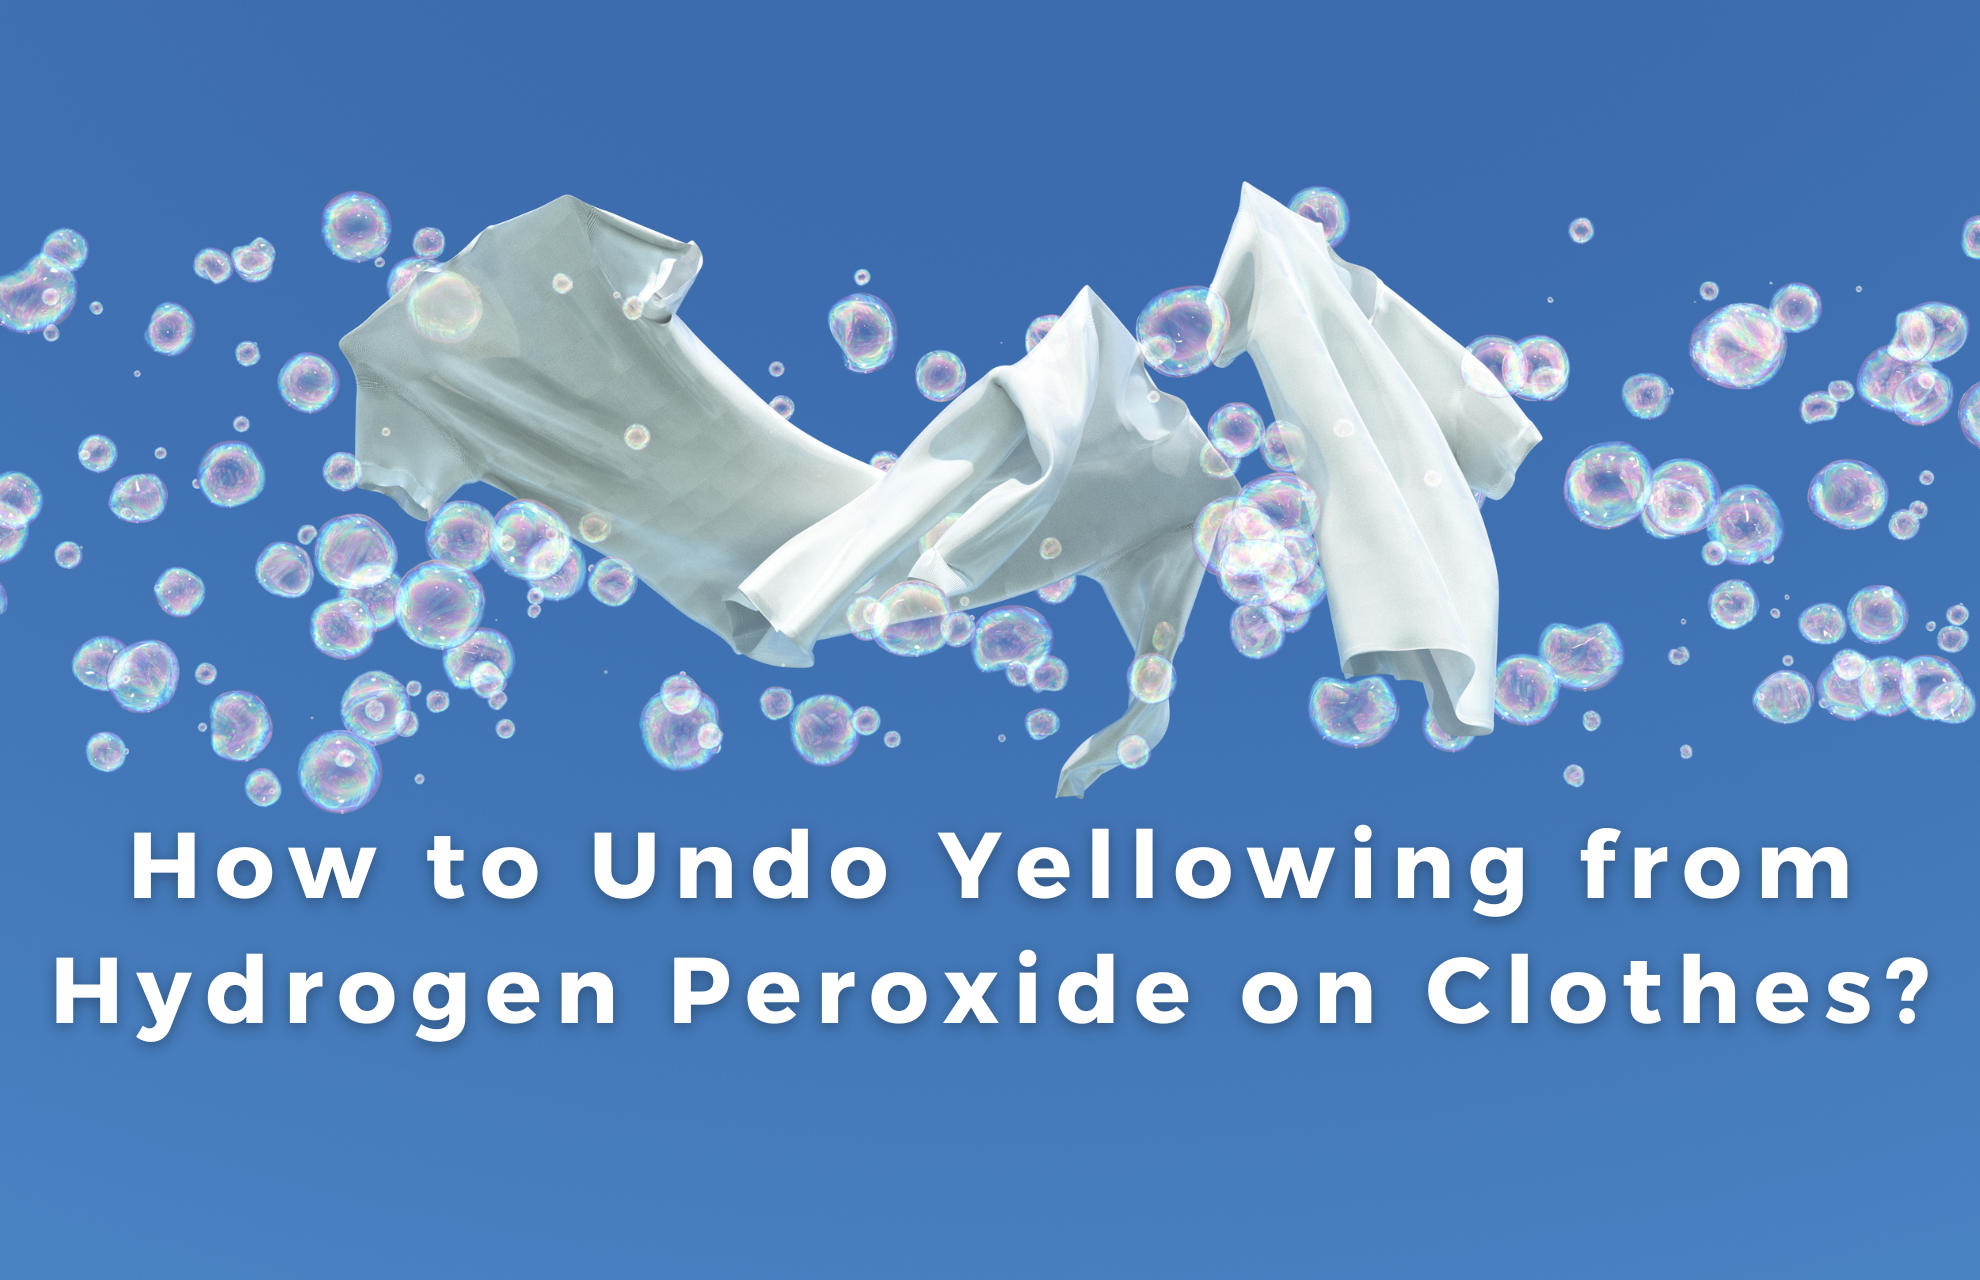 How to Undo Yellowing from Hydrogen Peroxide on Clothes?